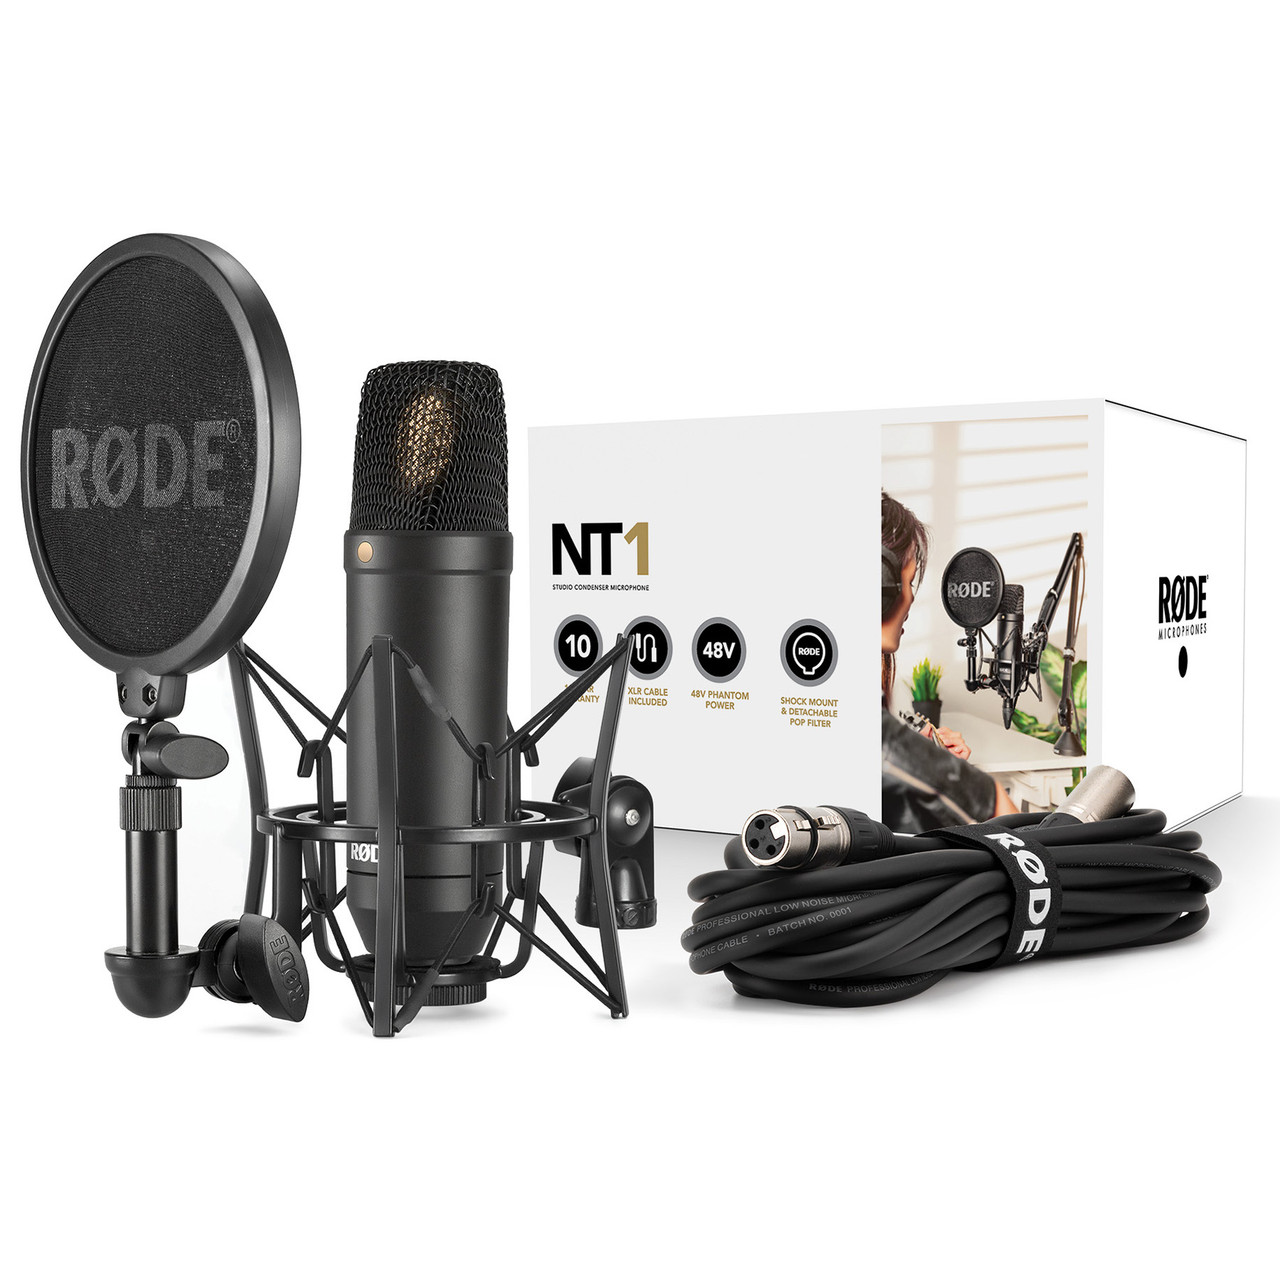 Rode NT1A Review - Cardioid Microphone Specs and Price